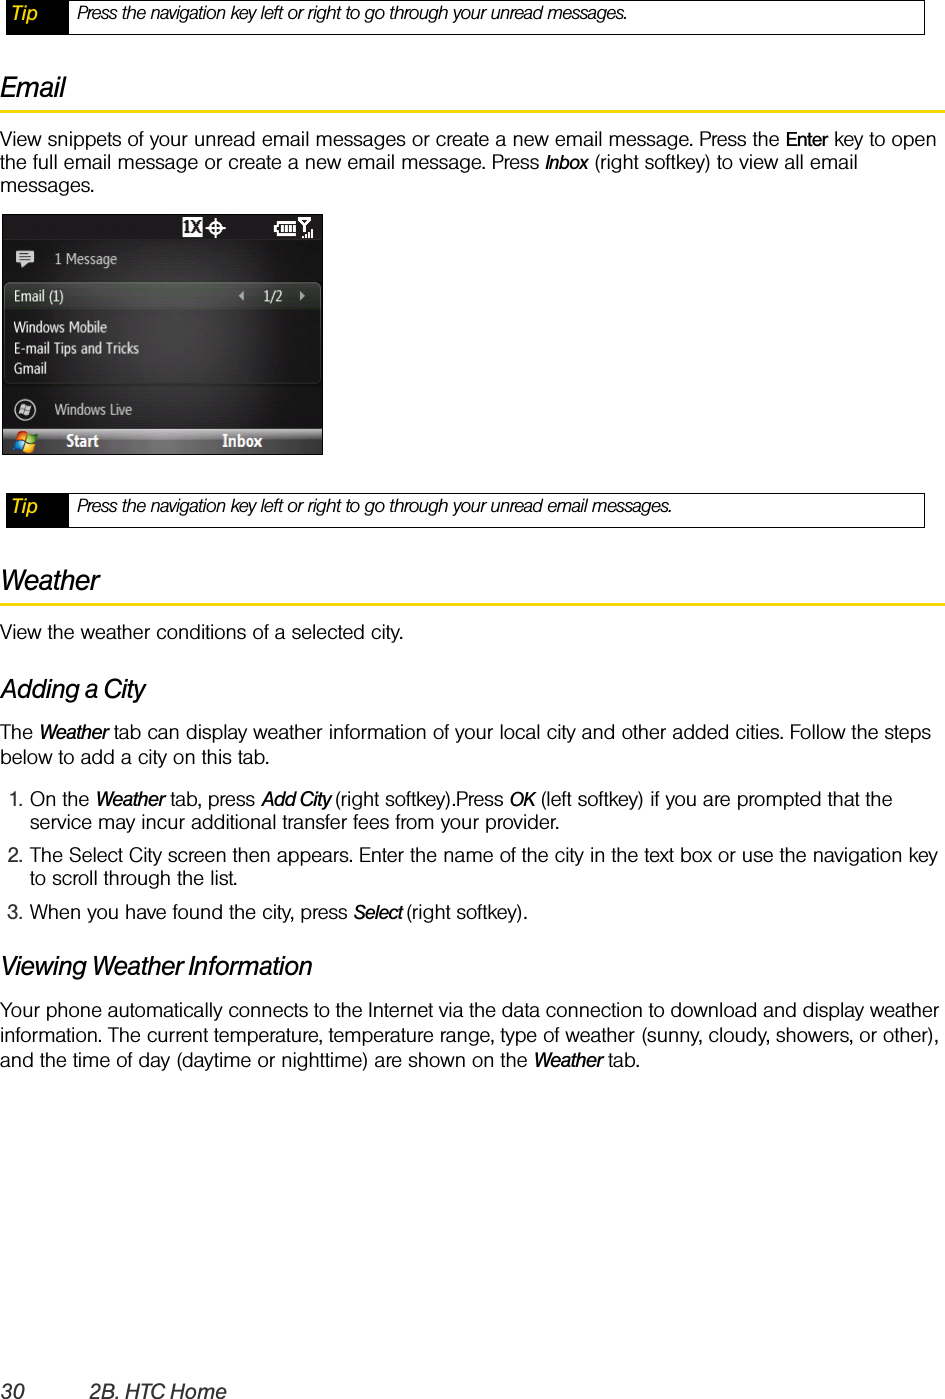 30 2B. HTC HomeEmailView snippets of your unread email messages or create a new email message. Press the Enter key to open the full email message or create a new email message. Press Inbox (right softkey) to view all email messages.WeatherView the weather conditions of a selected city.Adding a CityThe Weather tab can display weather information of your local city and other added cities. Follow the steps below to add a city on this tab.1. On the Weather tab, press Add City (right softkey).Press OK (left softkey) if you are prompted that the service may incur additional transfer fees from your provider.2. The Select City screen then appears. Enter the name of the city in the text box or use the navigation key to scroll through the list.3. When you have found the city, press Select (right softkey). Viewing Weather InformationYour phone automatically connects to the Internet via the data connection to download and display weather information. The current temperature, temperature range, type of weather (sunny, cloudy, showers, or other), and the time of day (daytime or nighttime) are shown on the Weather tab. Tip Press the navigation key left or right to go through your unread messages. Tip Press the navigation key left or right to go through your unread email messages. 